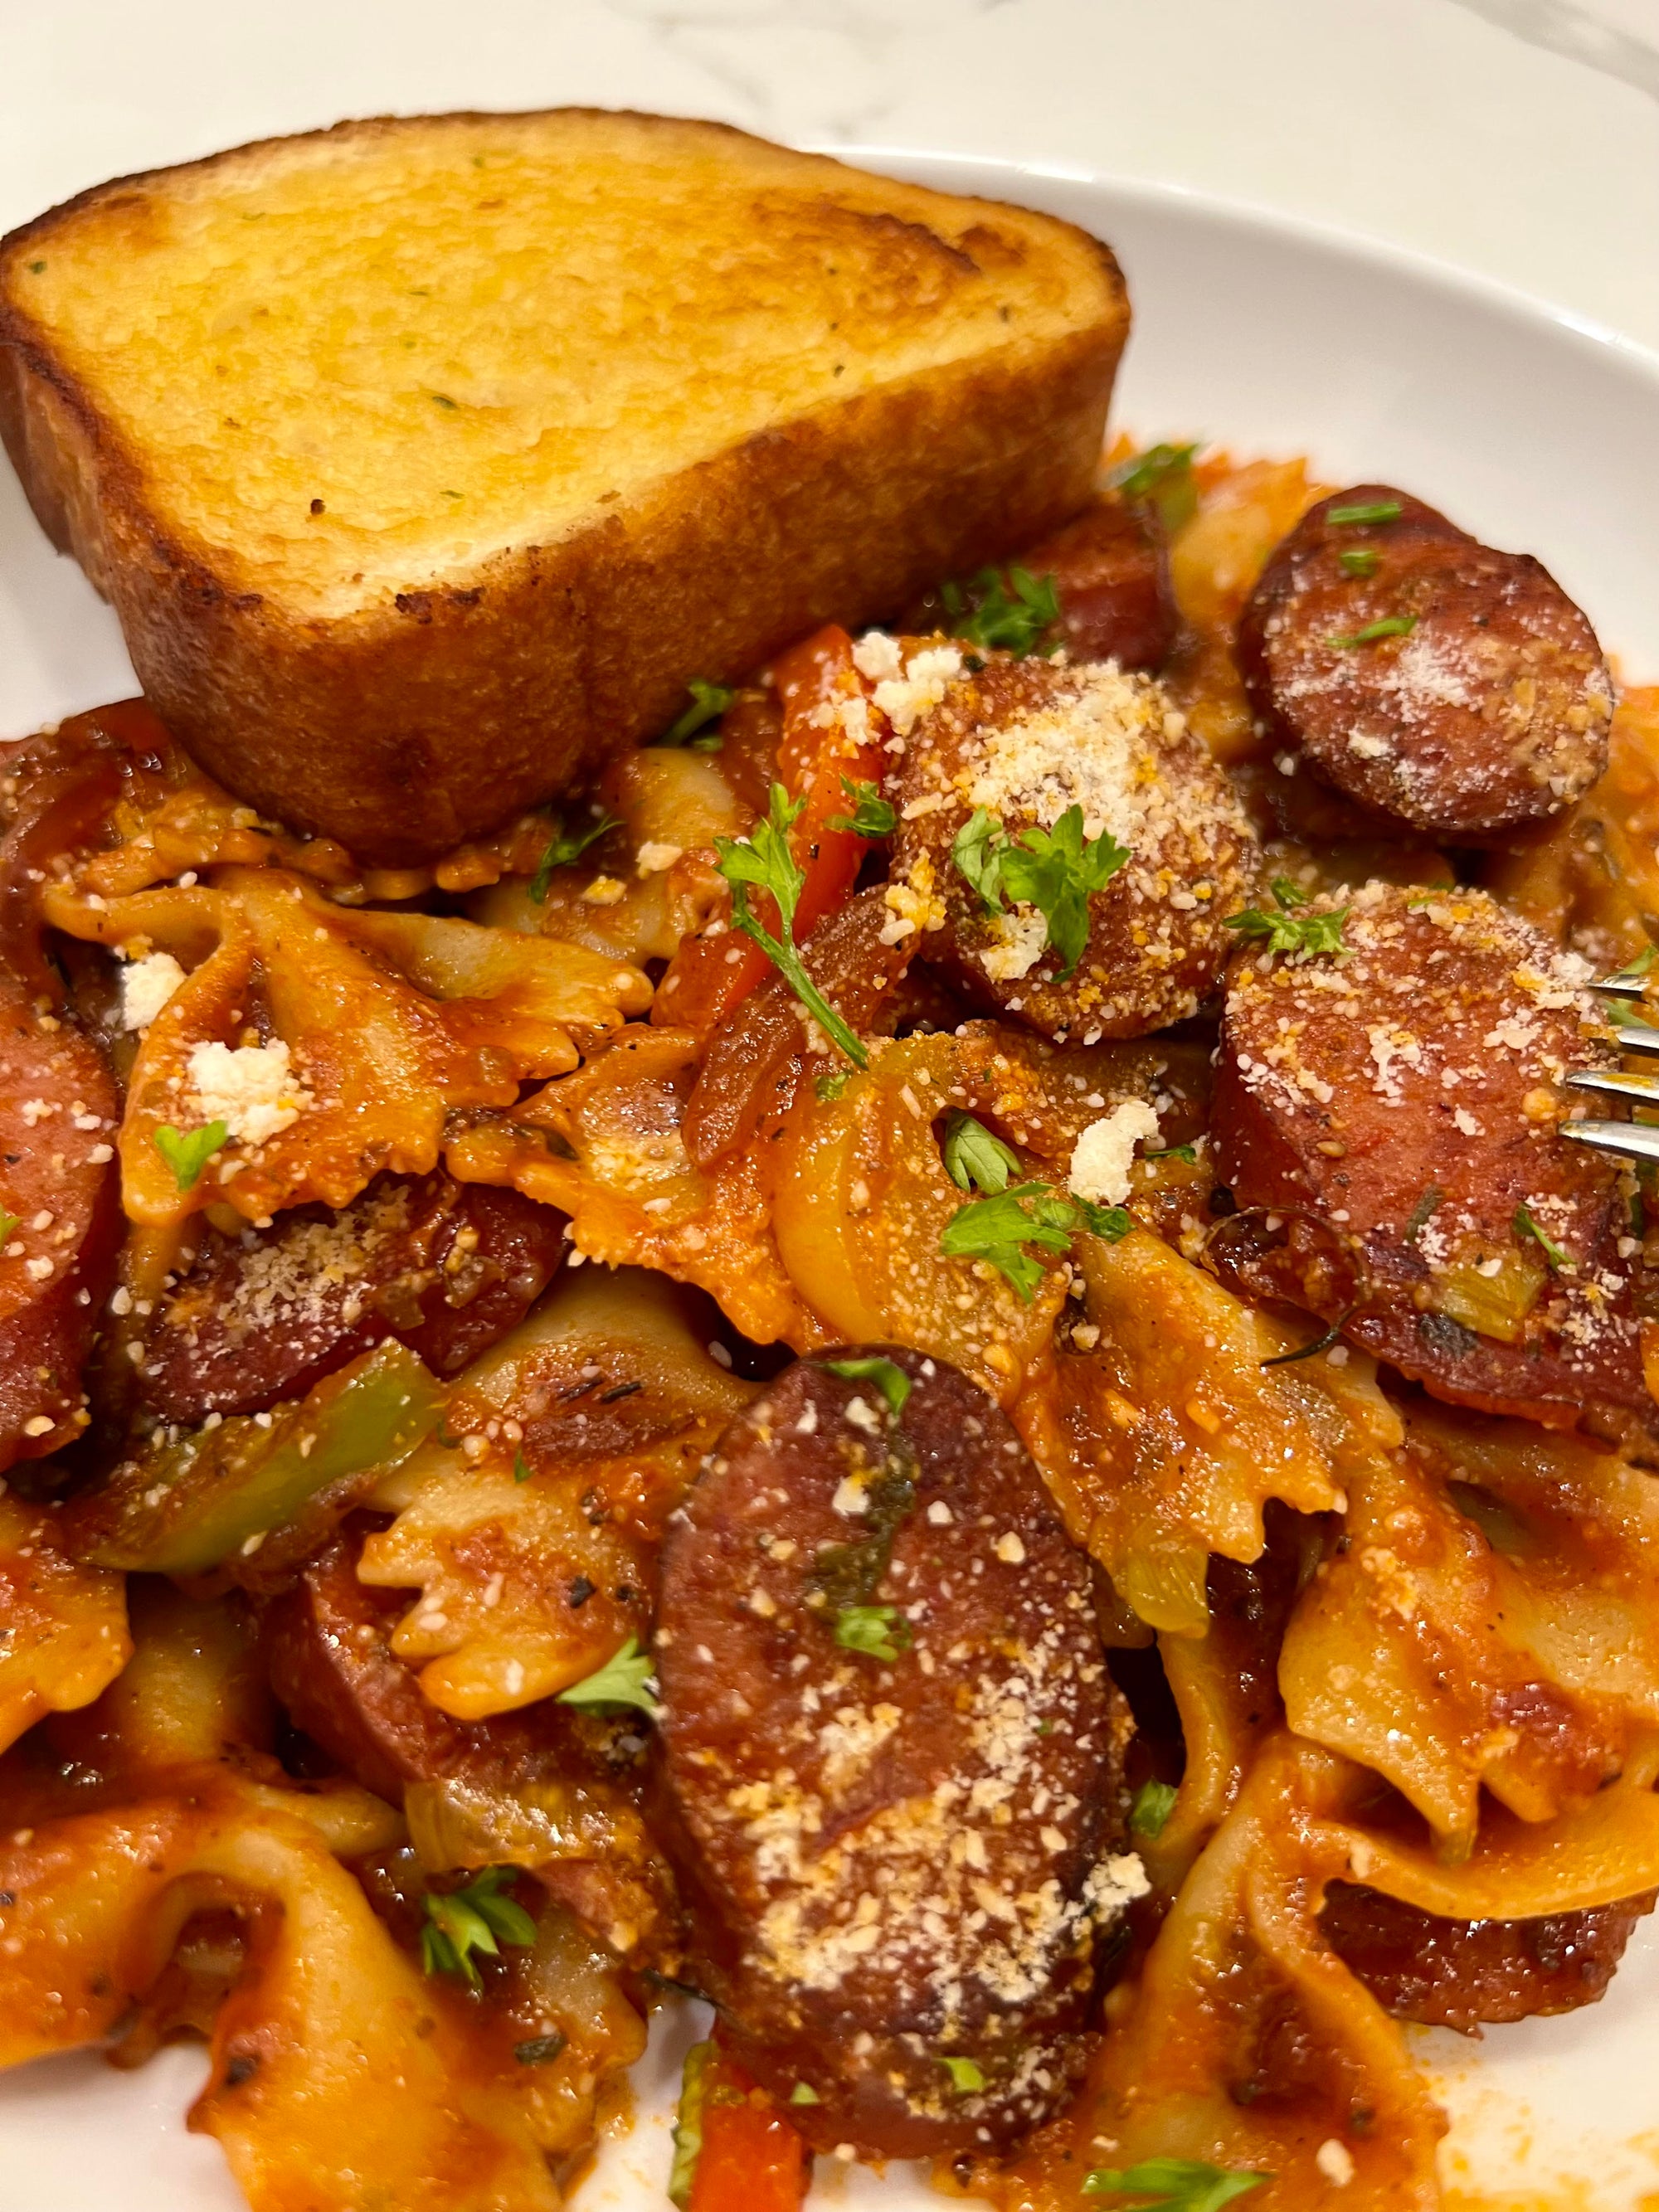 Pasta with Sausage & Peppers